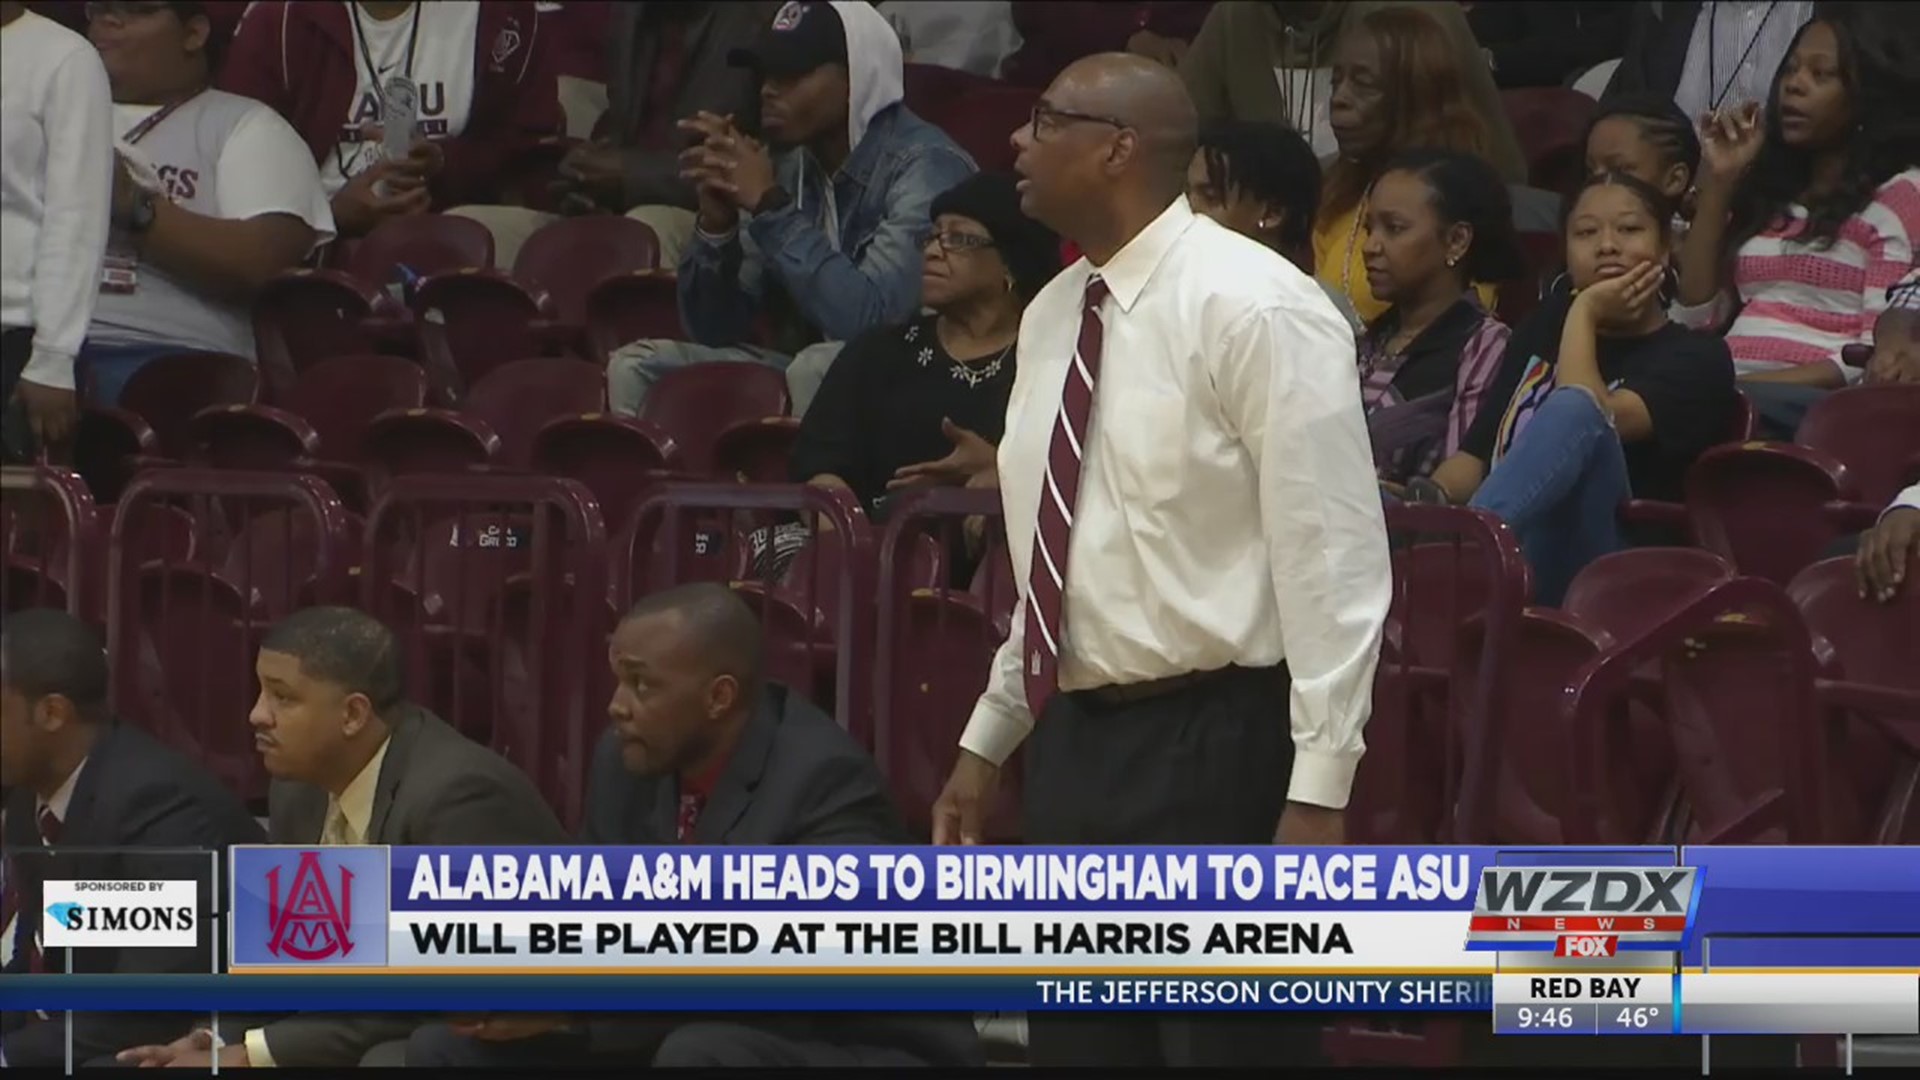 The Alabama A&M - Alabama State rivalry will have a Magic City Classic feel when the Bulldogs & Lady Bulldogs take on Alabama State this weekend at the Bill Harris Arena.